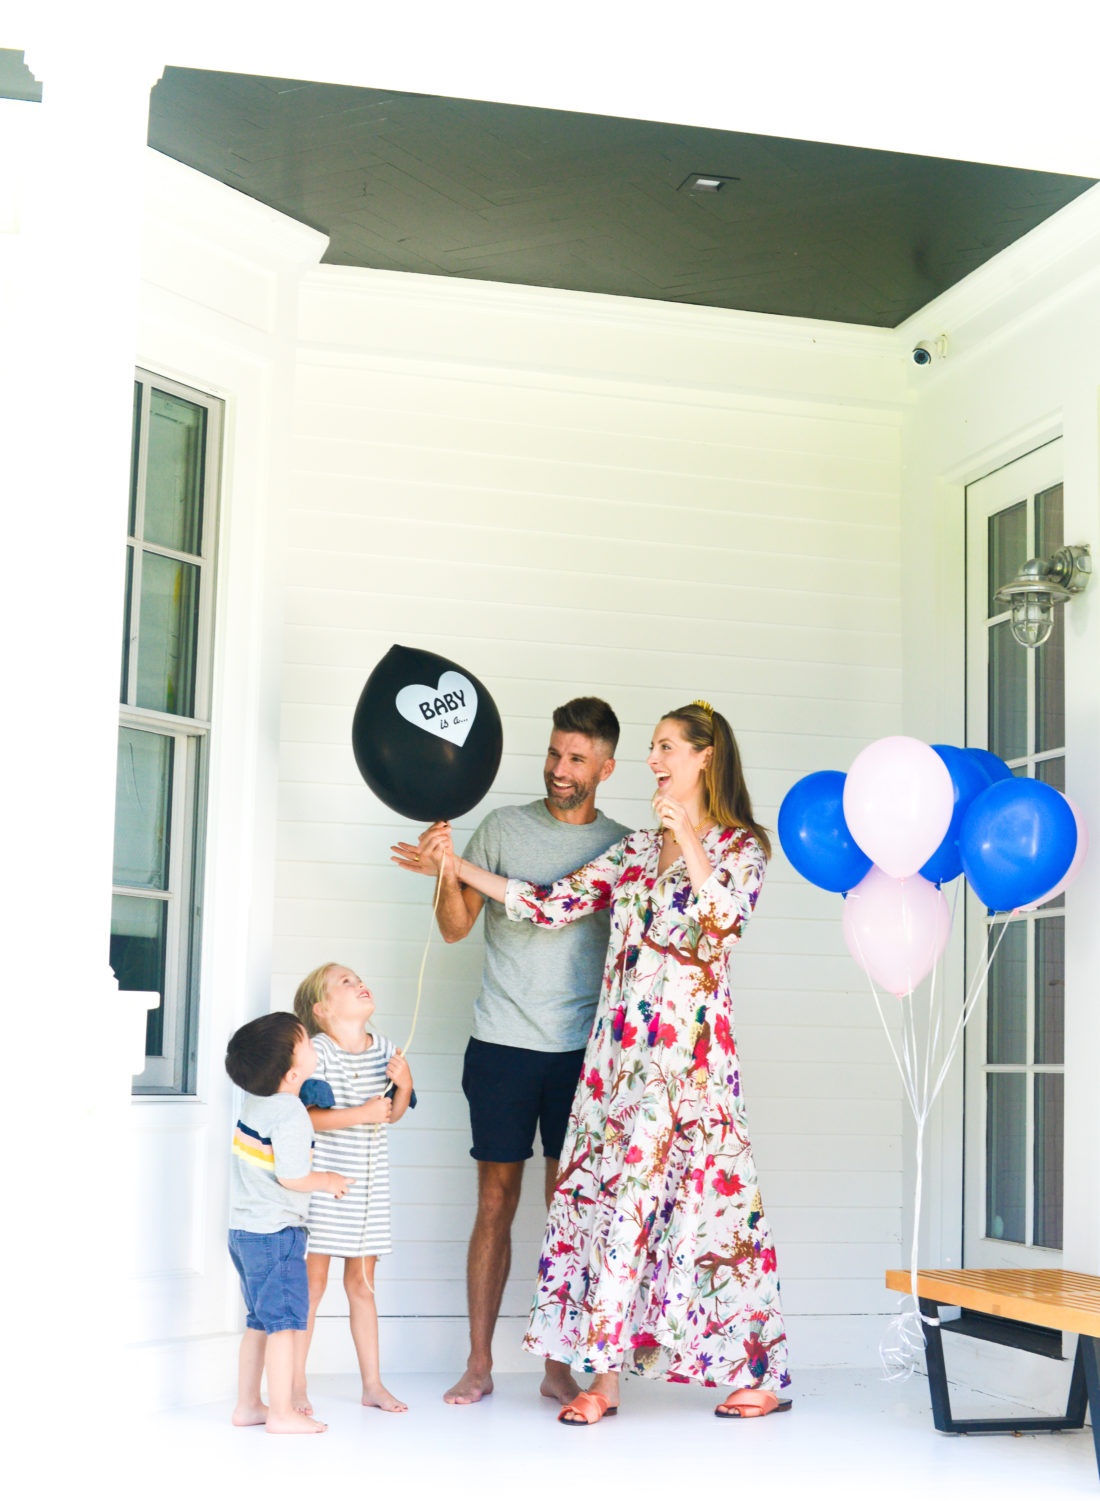 Eva Amurri Martino and husband Kyle hold a balloon with the gender of their third child